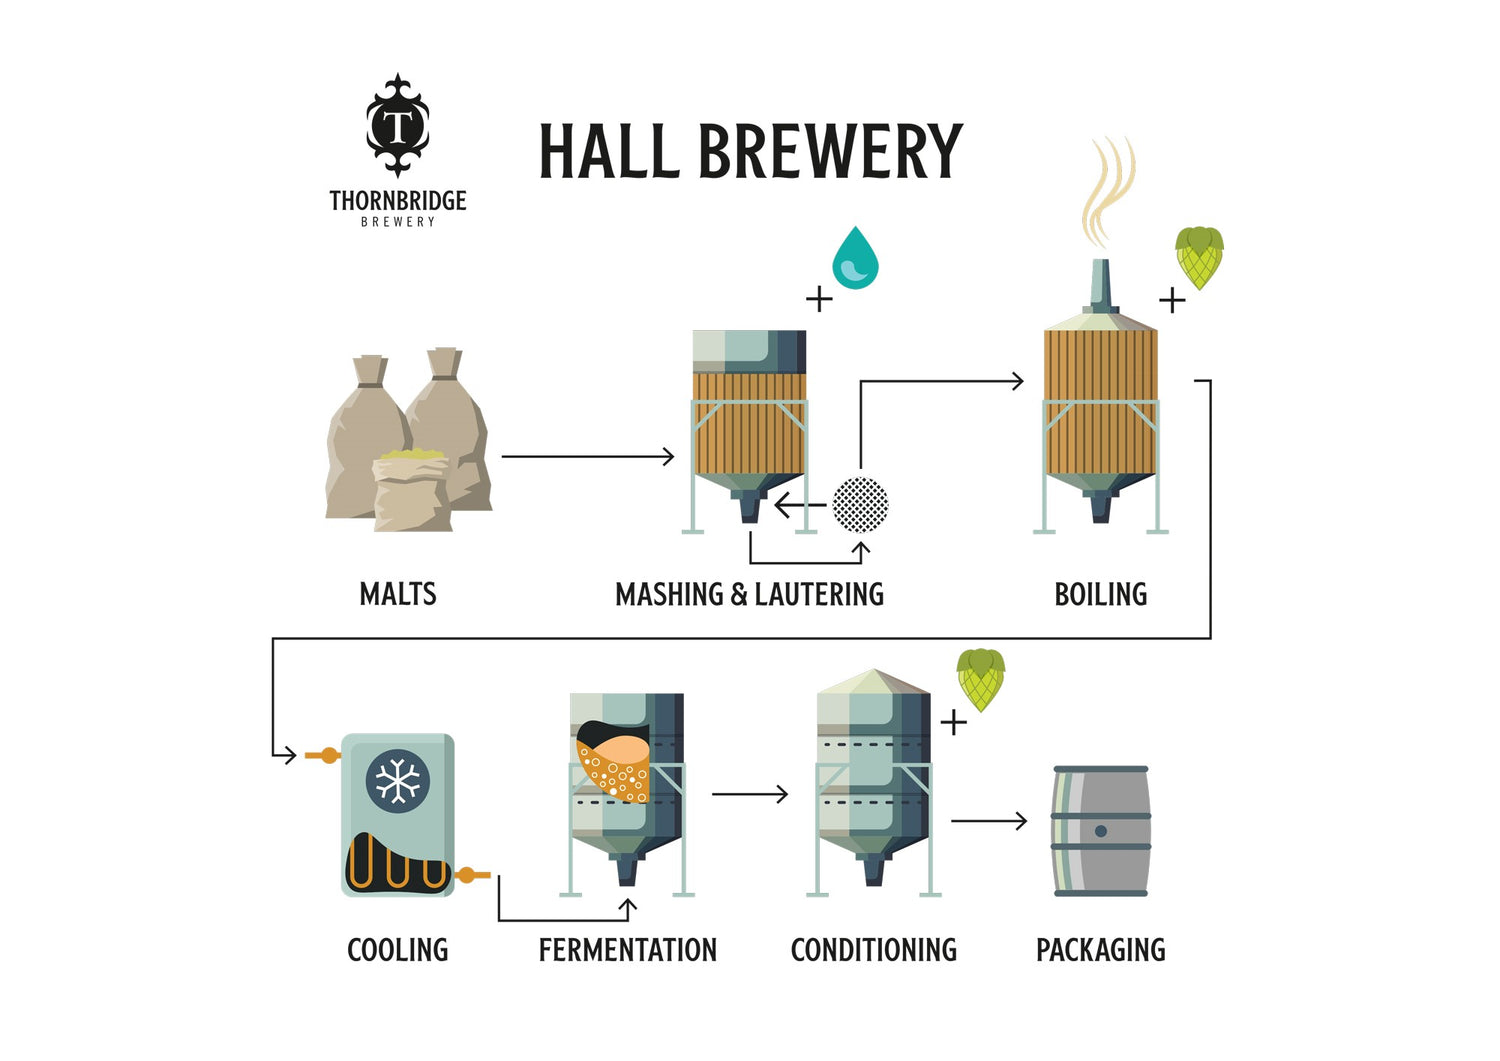 The brewing process in the small hall brewery